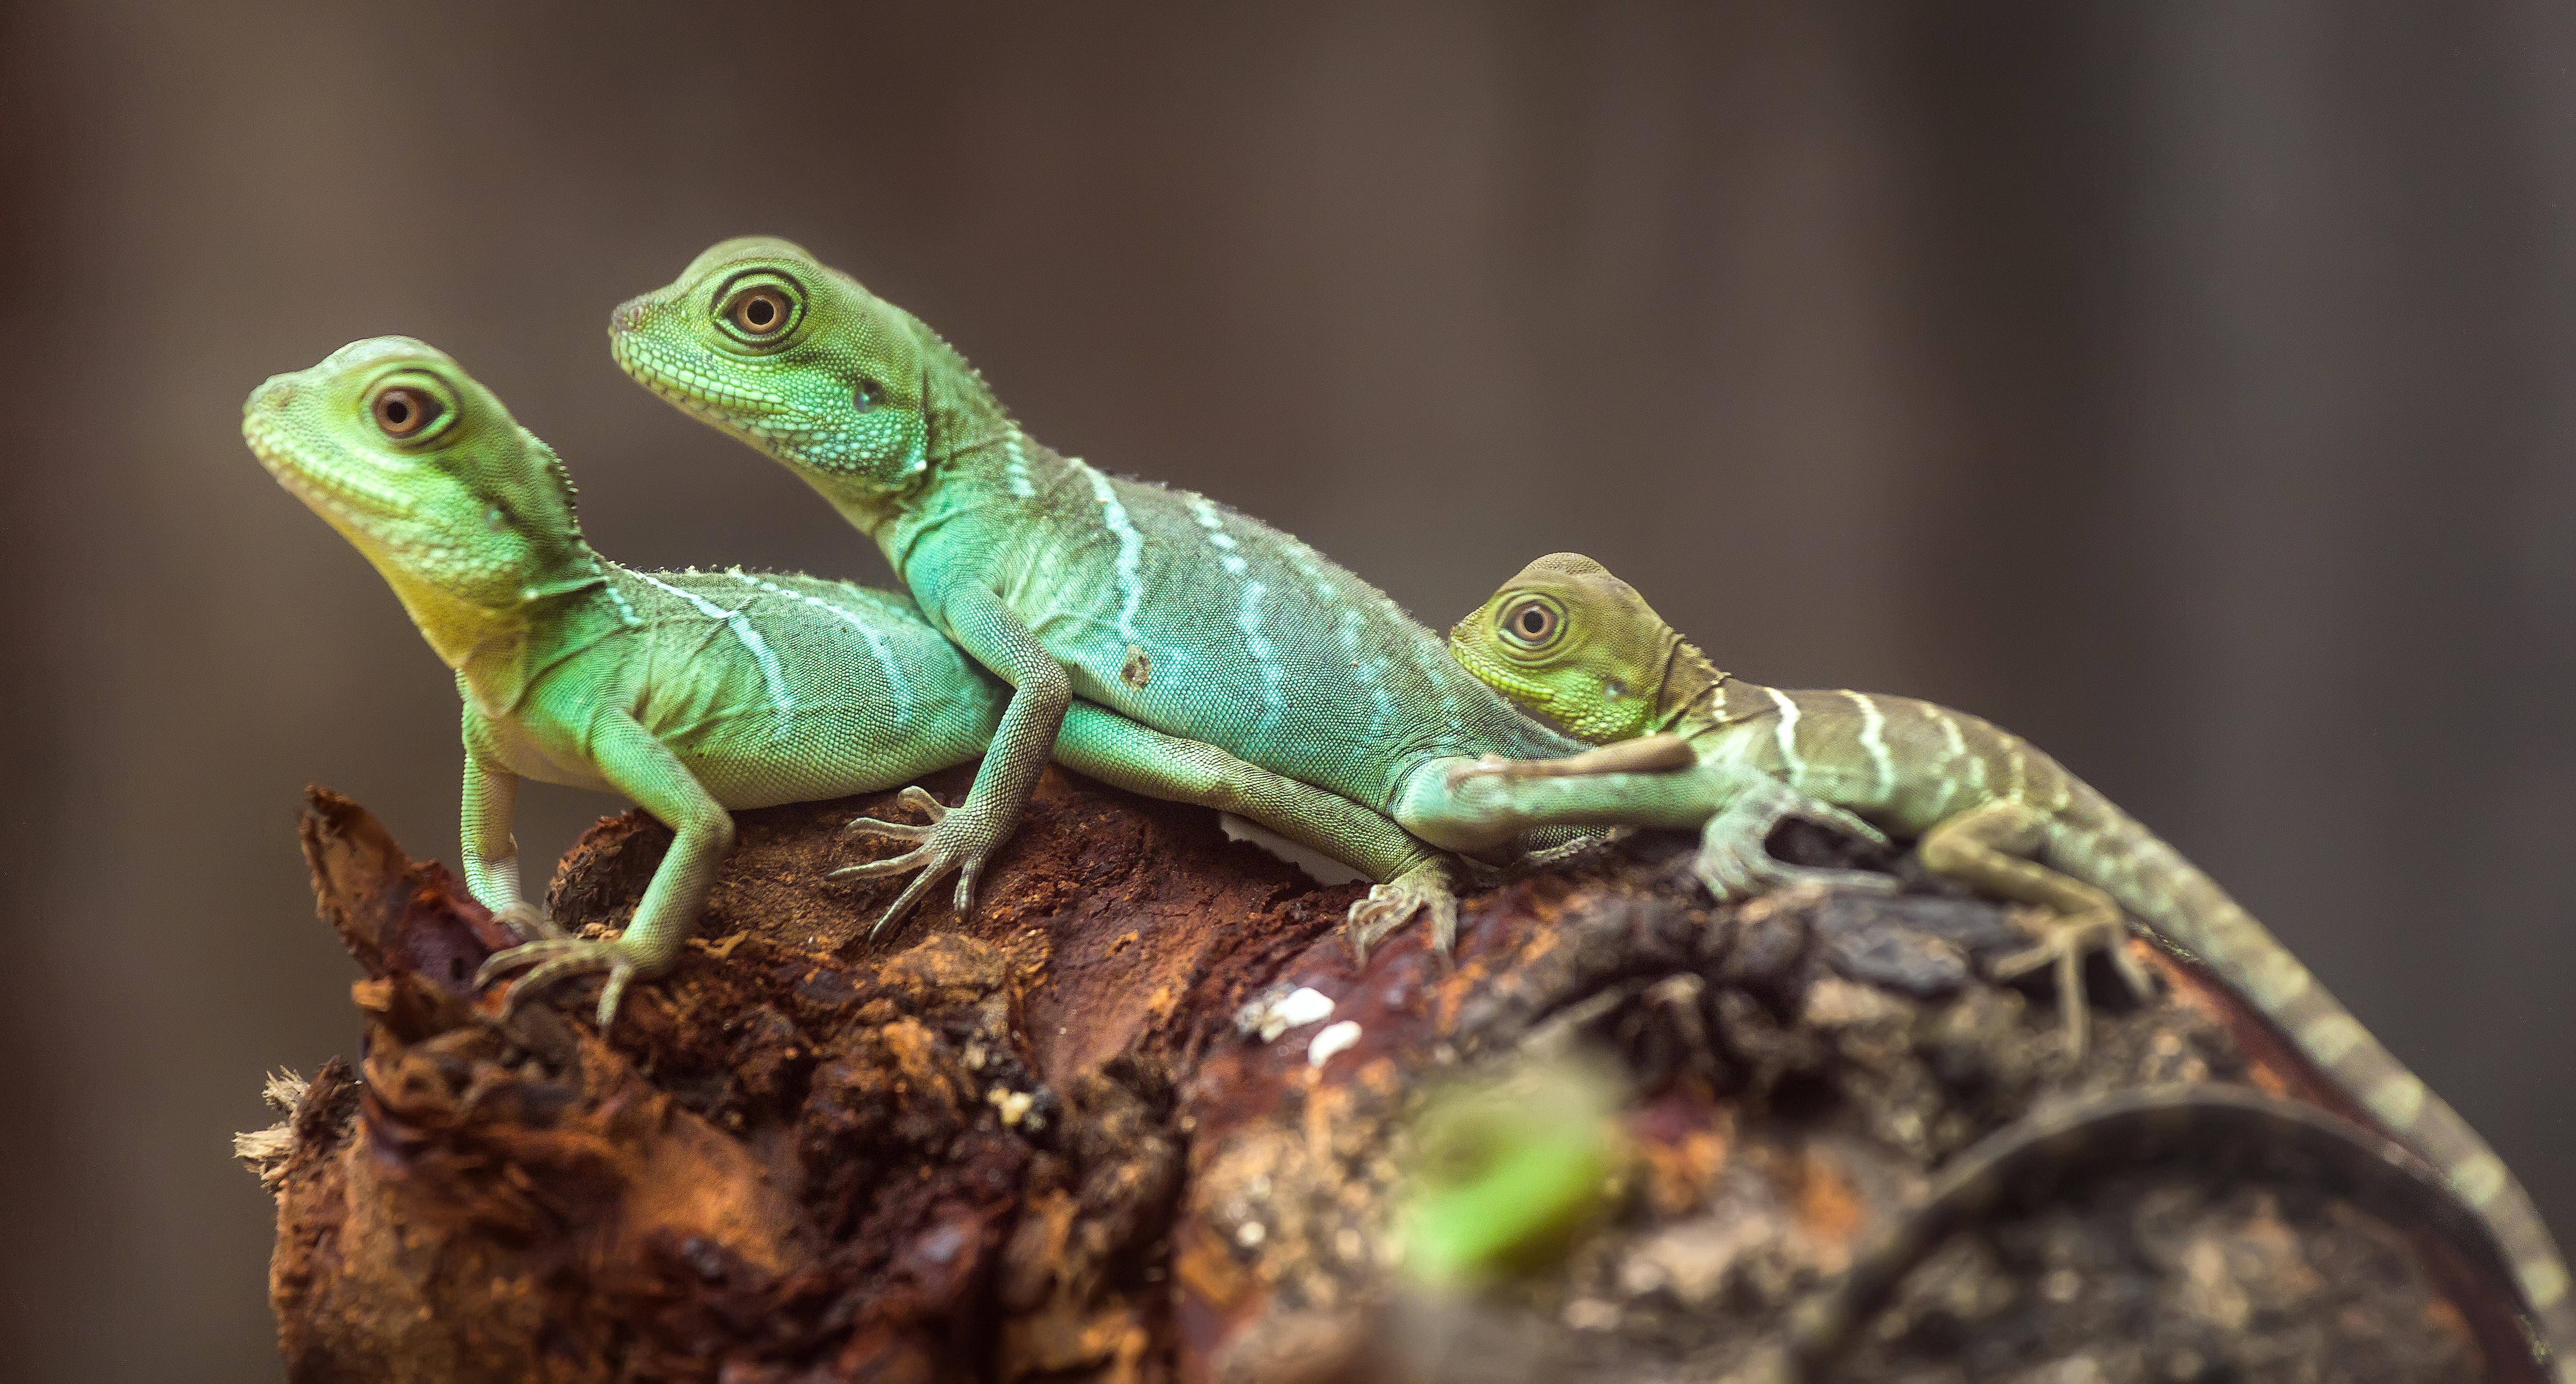 Lizards: Fun Facts and 6 Basic Information - PestWiki